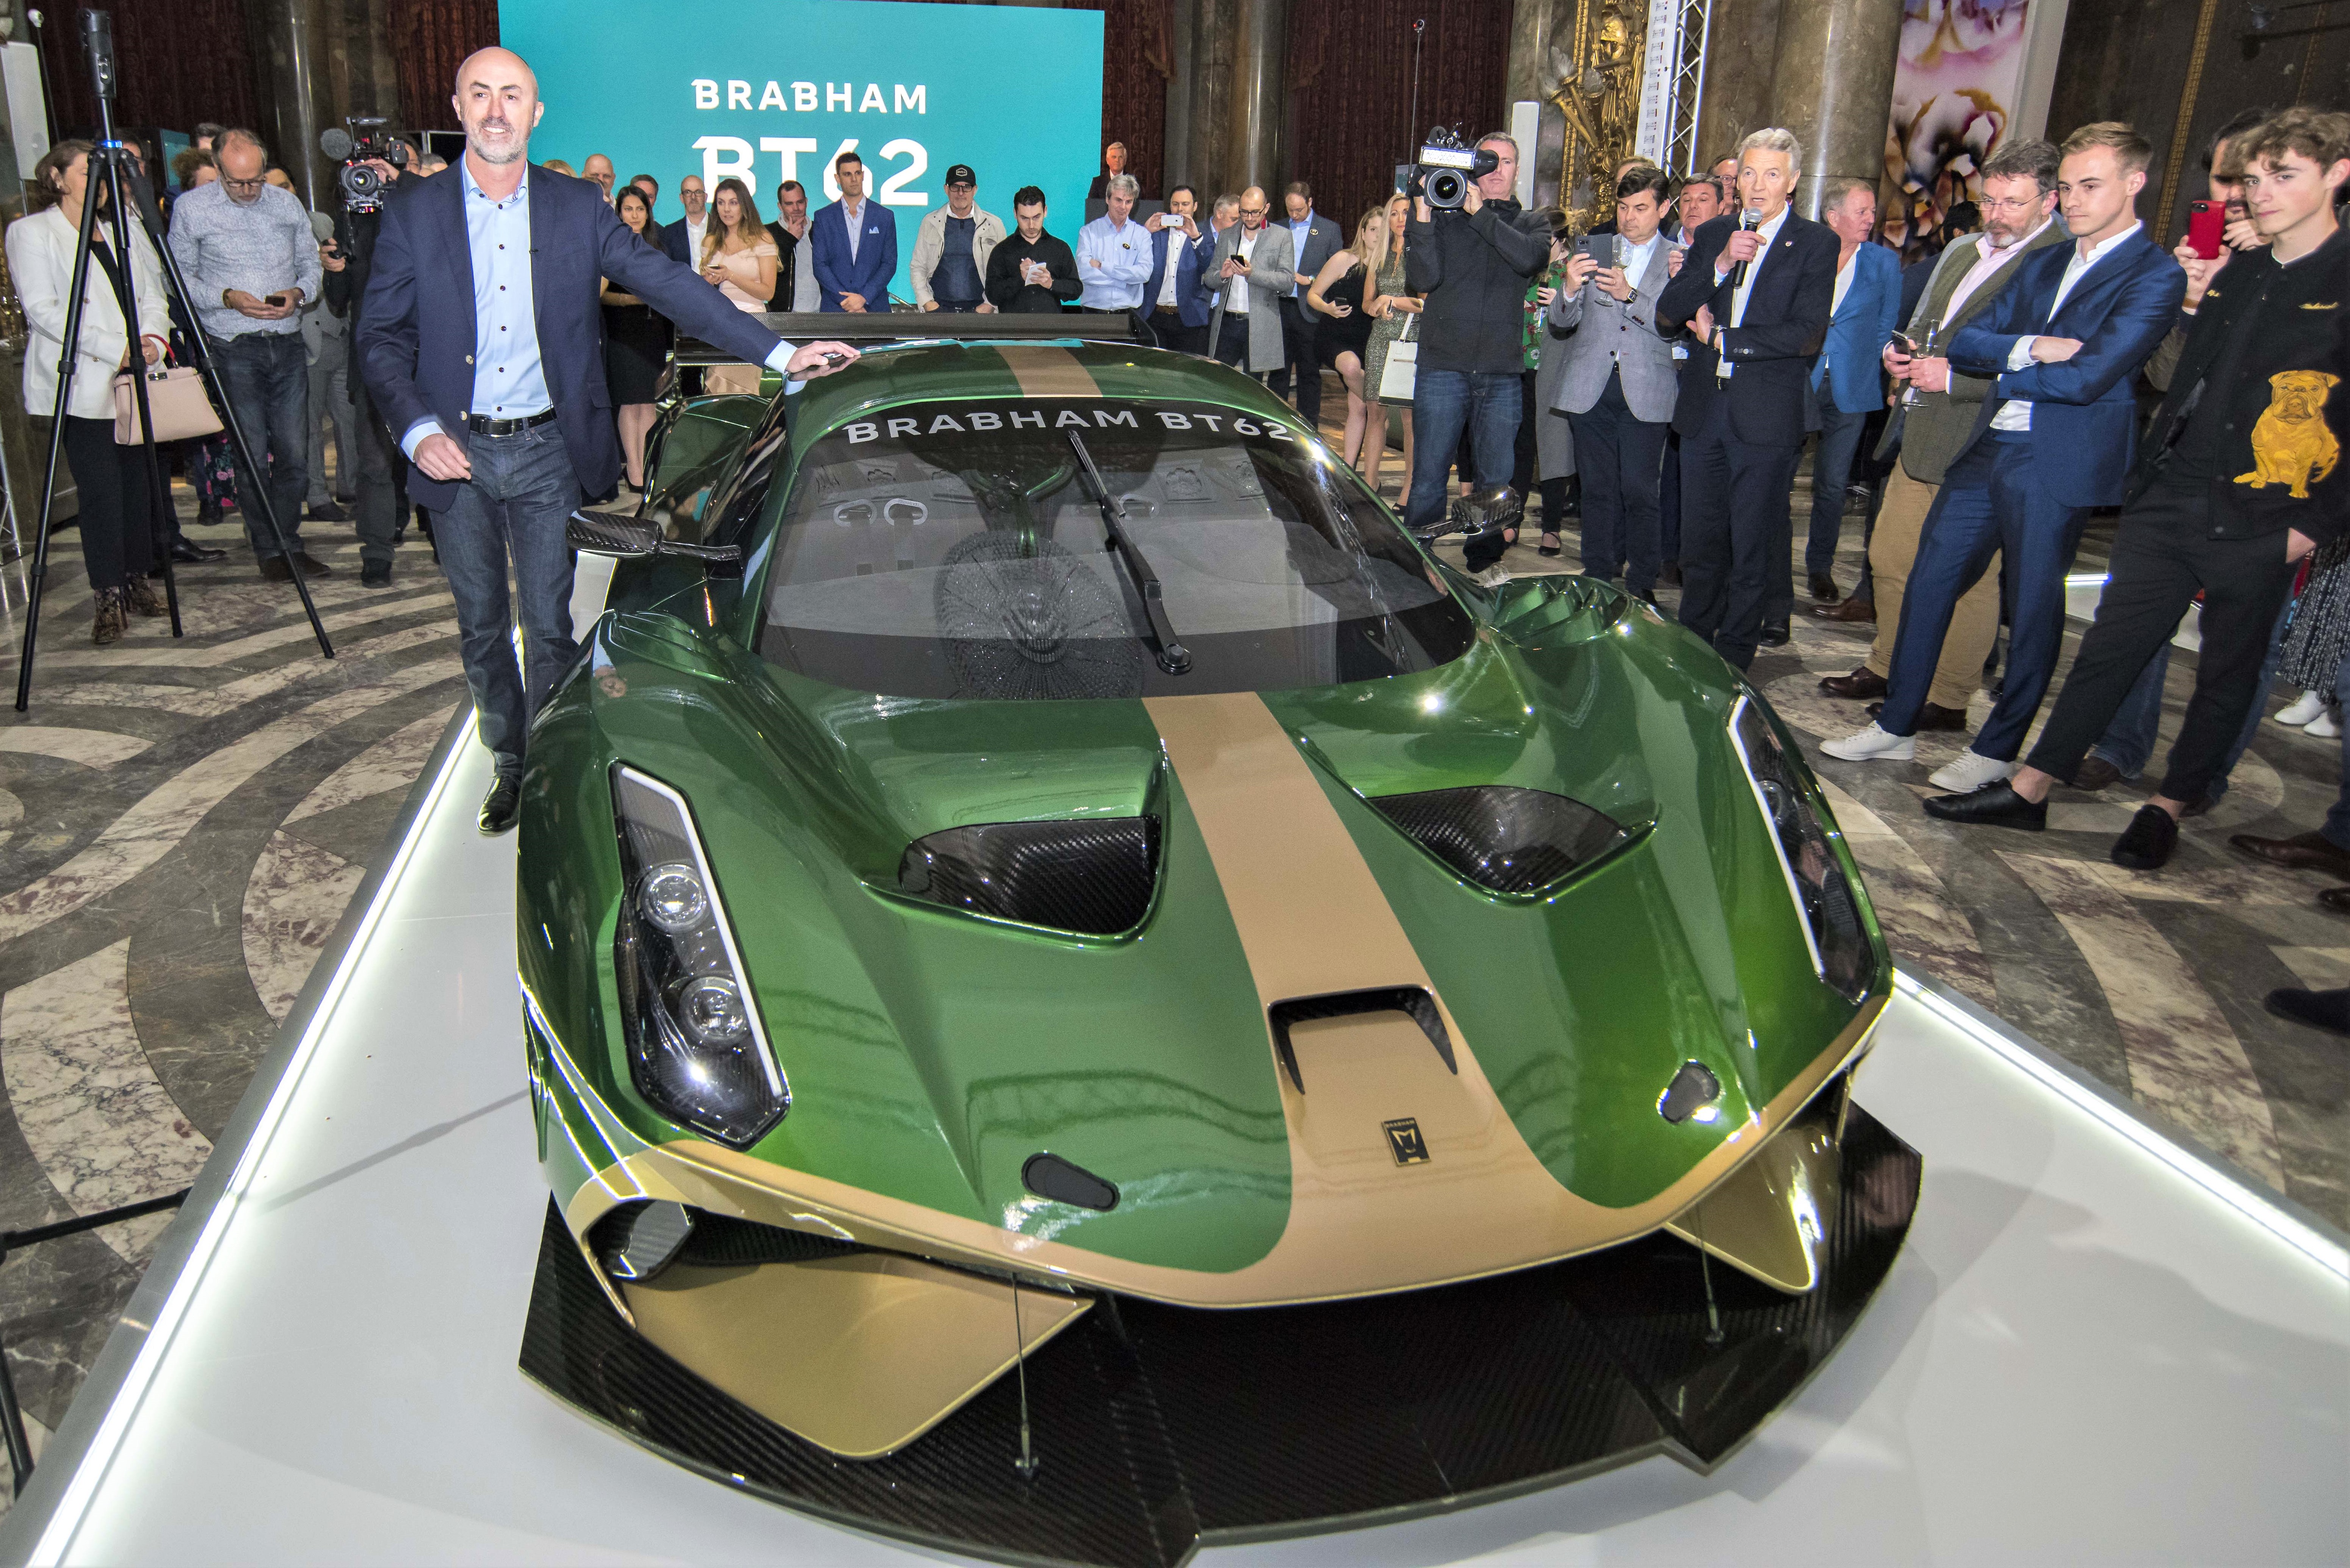 David Brabham introduces the BT62 to the assembled dignitaries and media 